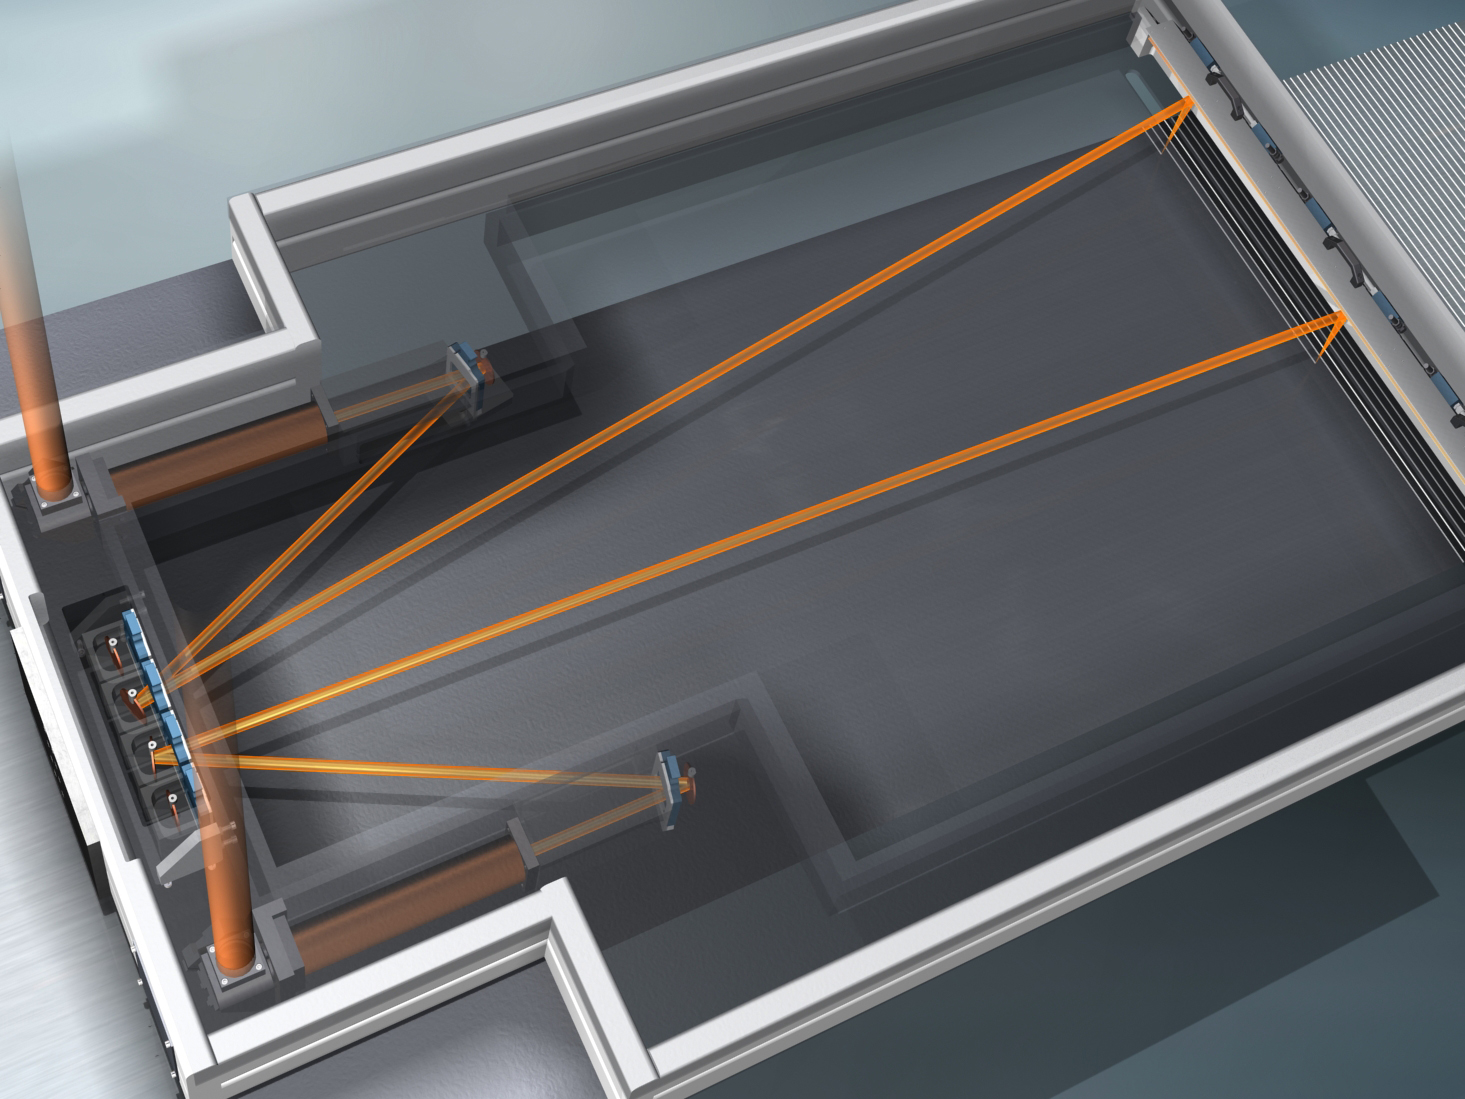 Principle of the optical construction (lasertronic® SAO x.x/6D) for laser processing of grain-oriented electrical steel by the usage of two redundant optical paths (orange lines = laser beams © Fraunhofer IWS Dresden